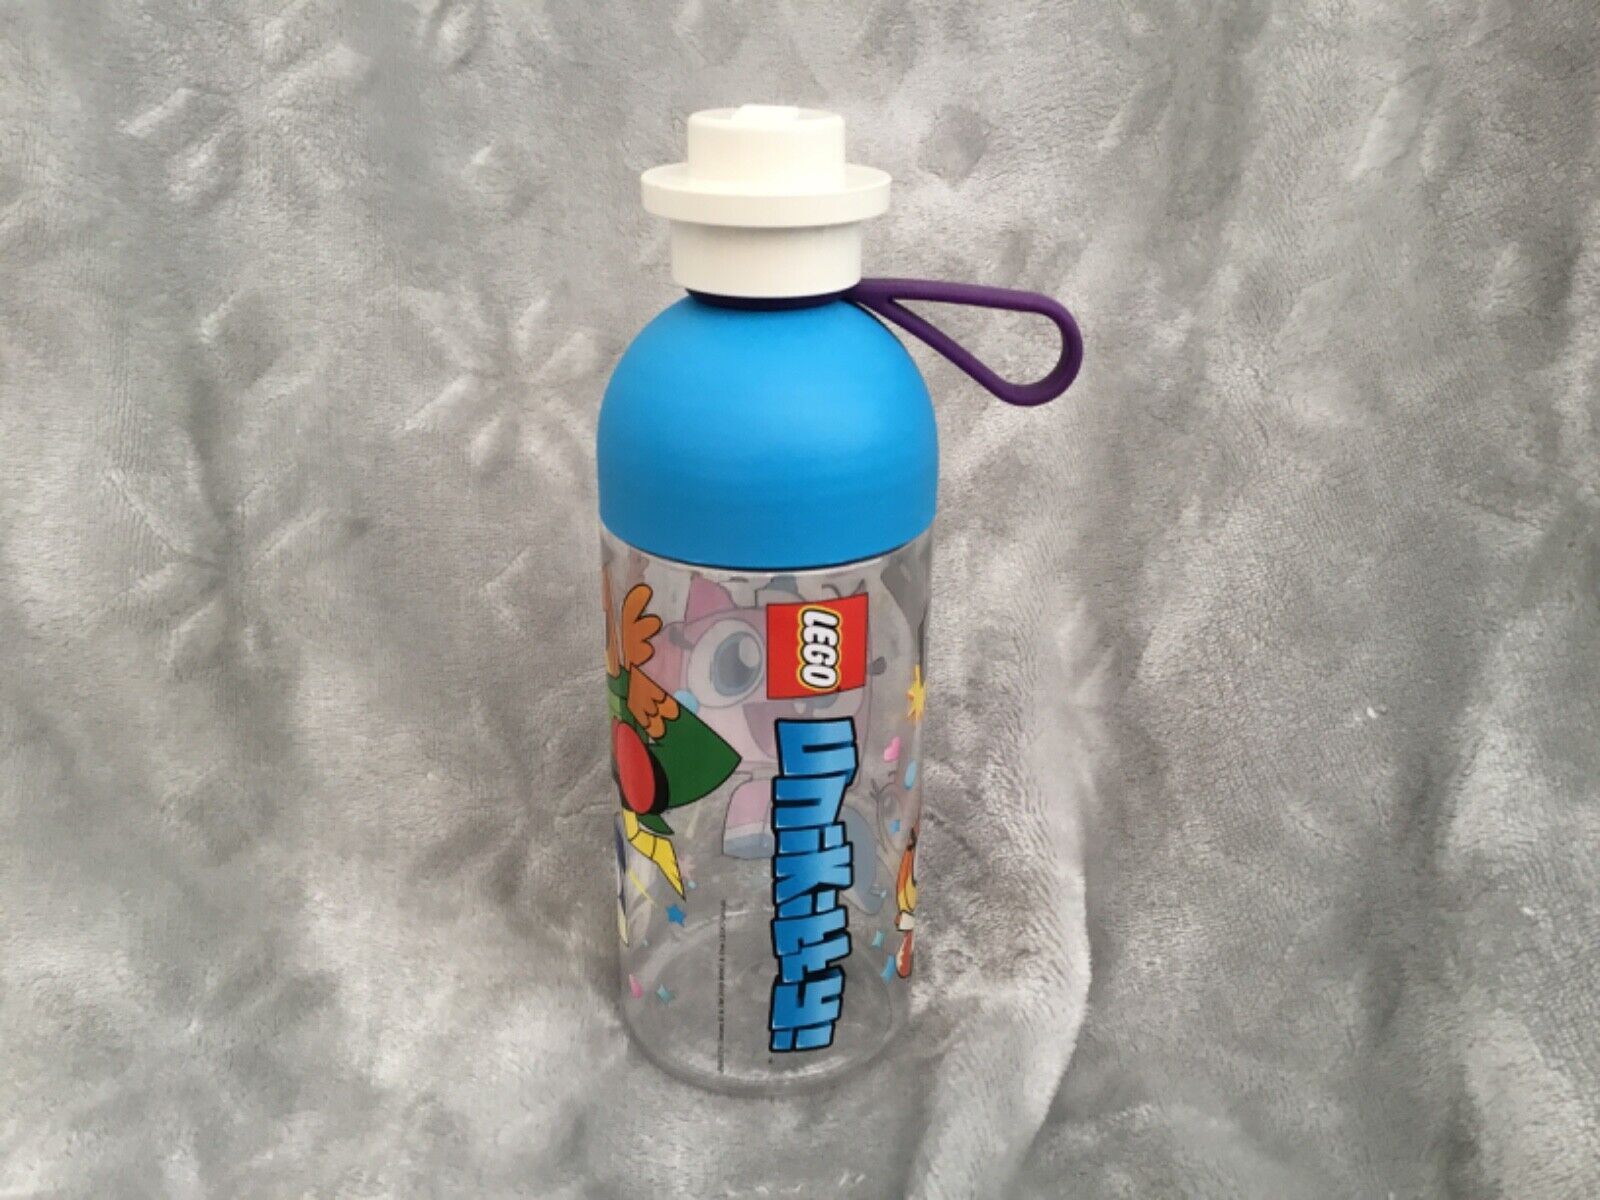 Lego UniKitty Blue/Clear/Print Water Bottle New/Other/Unused W/O Tags